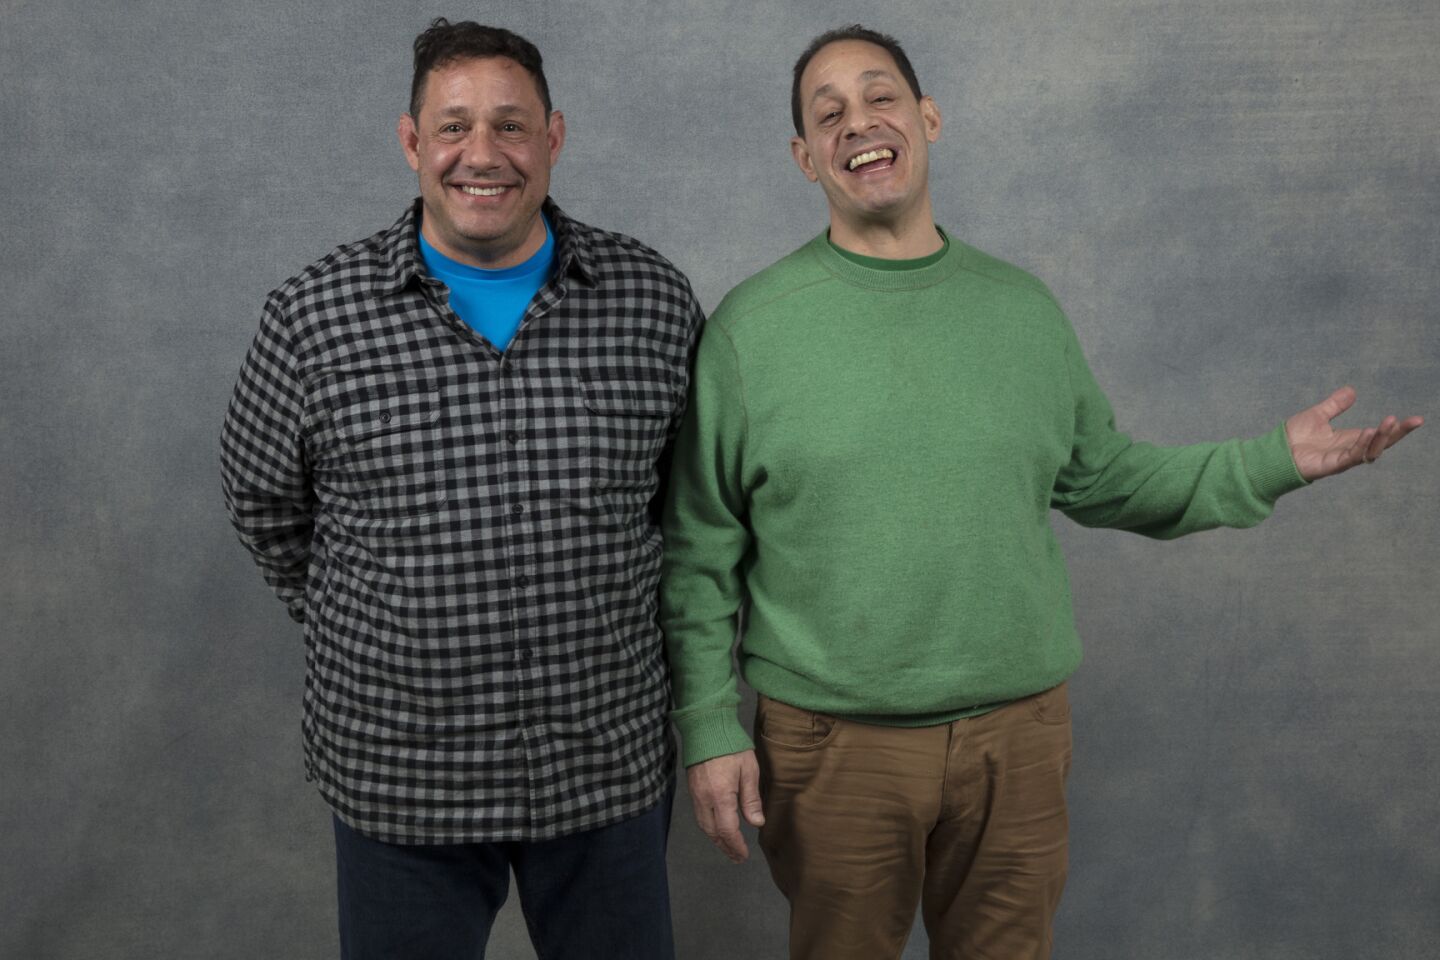 David Kellman and Bobby Shafran, from the film, "Three Identical Strangers," photographed in the L.A. Times Studio at Chase Sapphire on Main, during the Sundance Film Festival in Park City, Utah, Jan. 20, 2018.